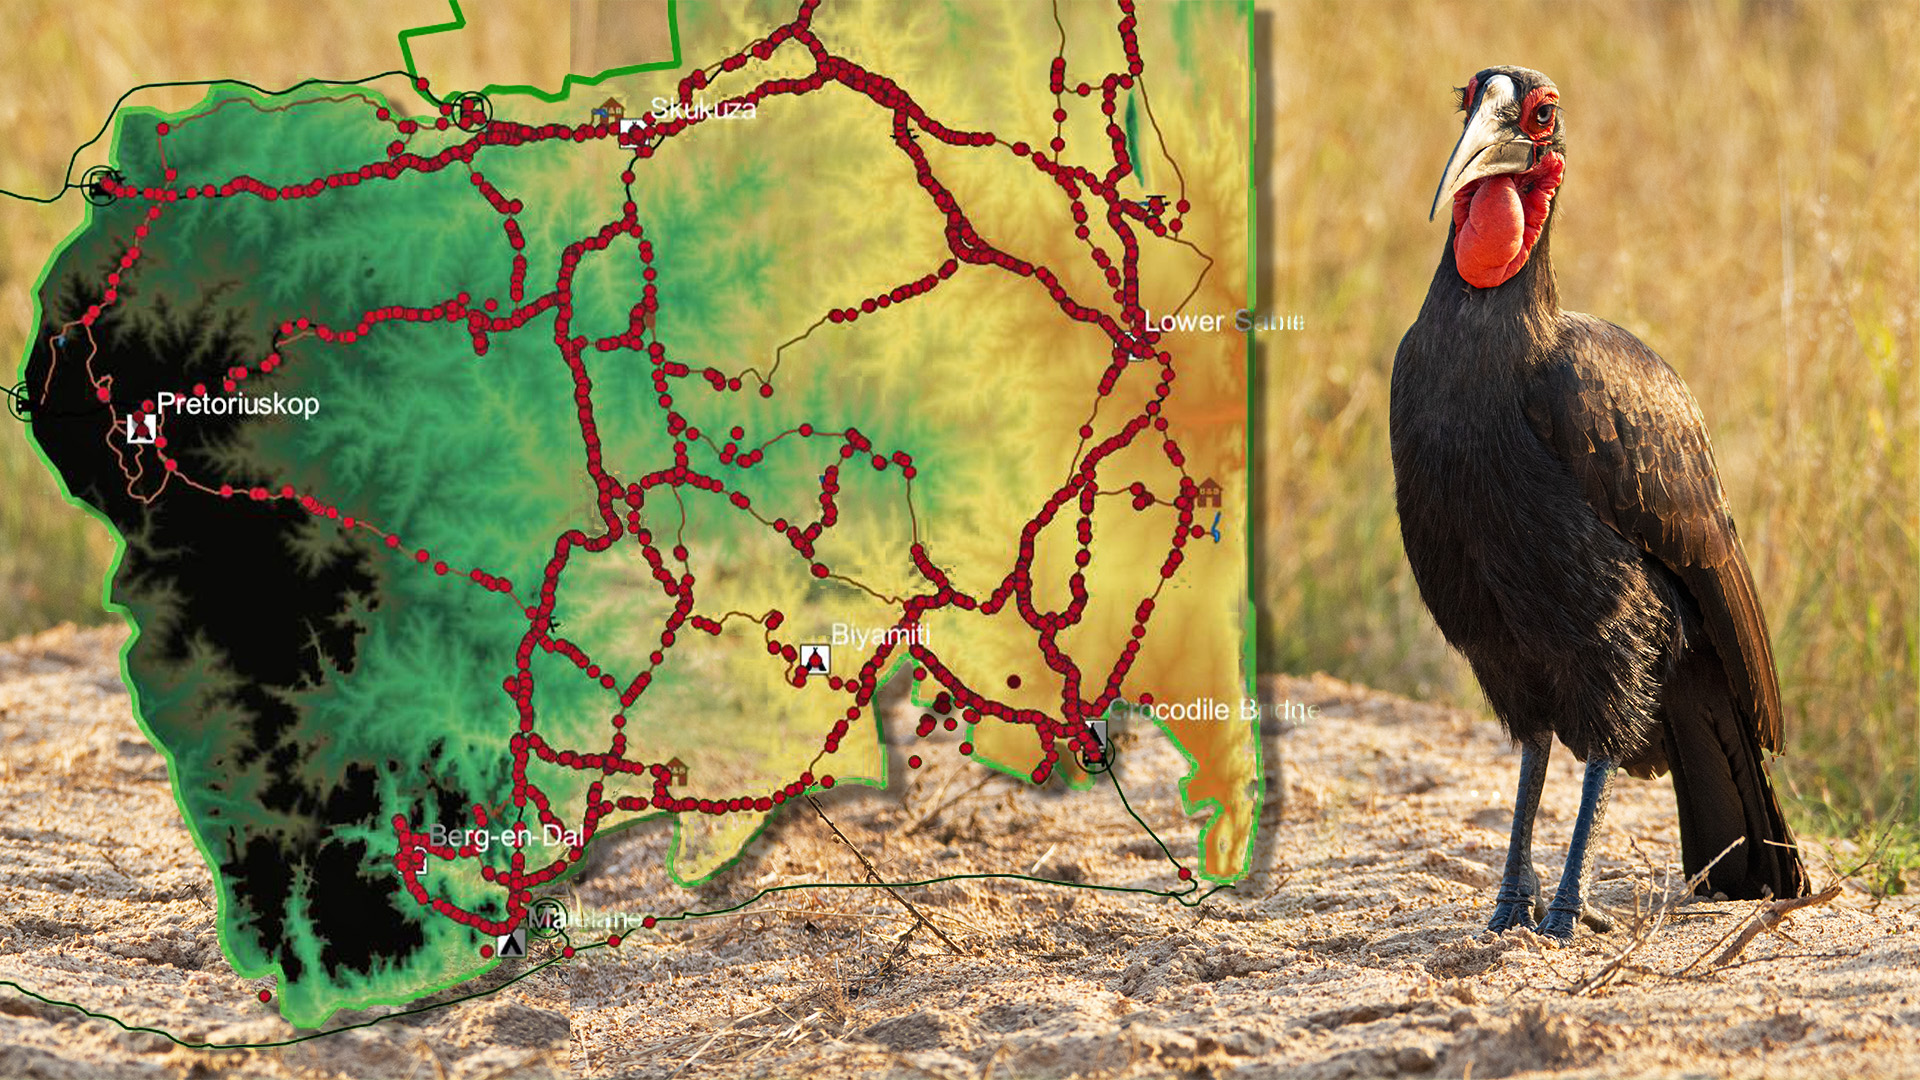 Where to Spot Southern Ground Hornbills in Kruger